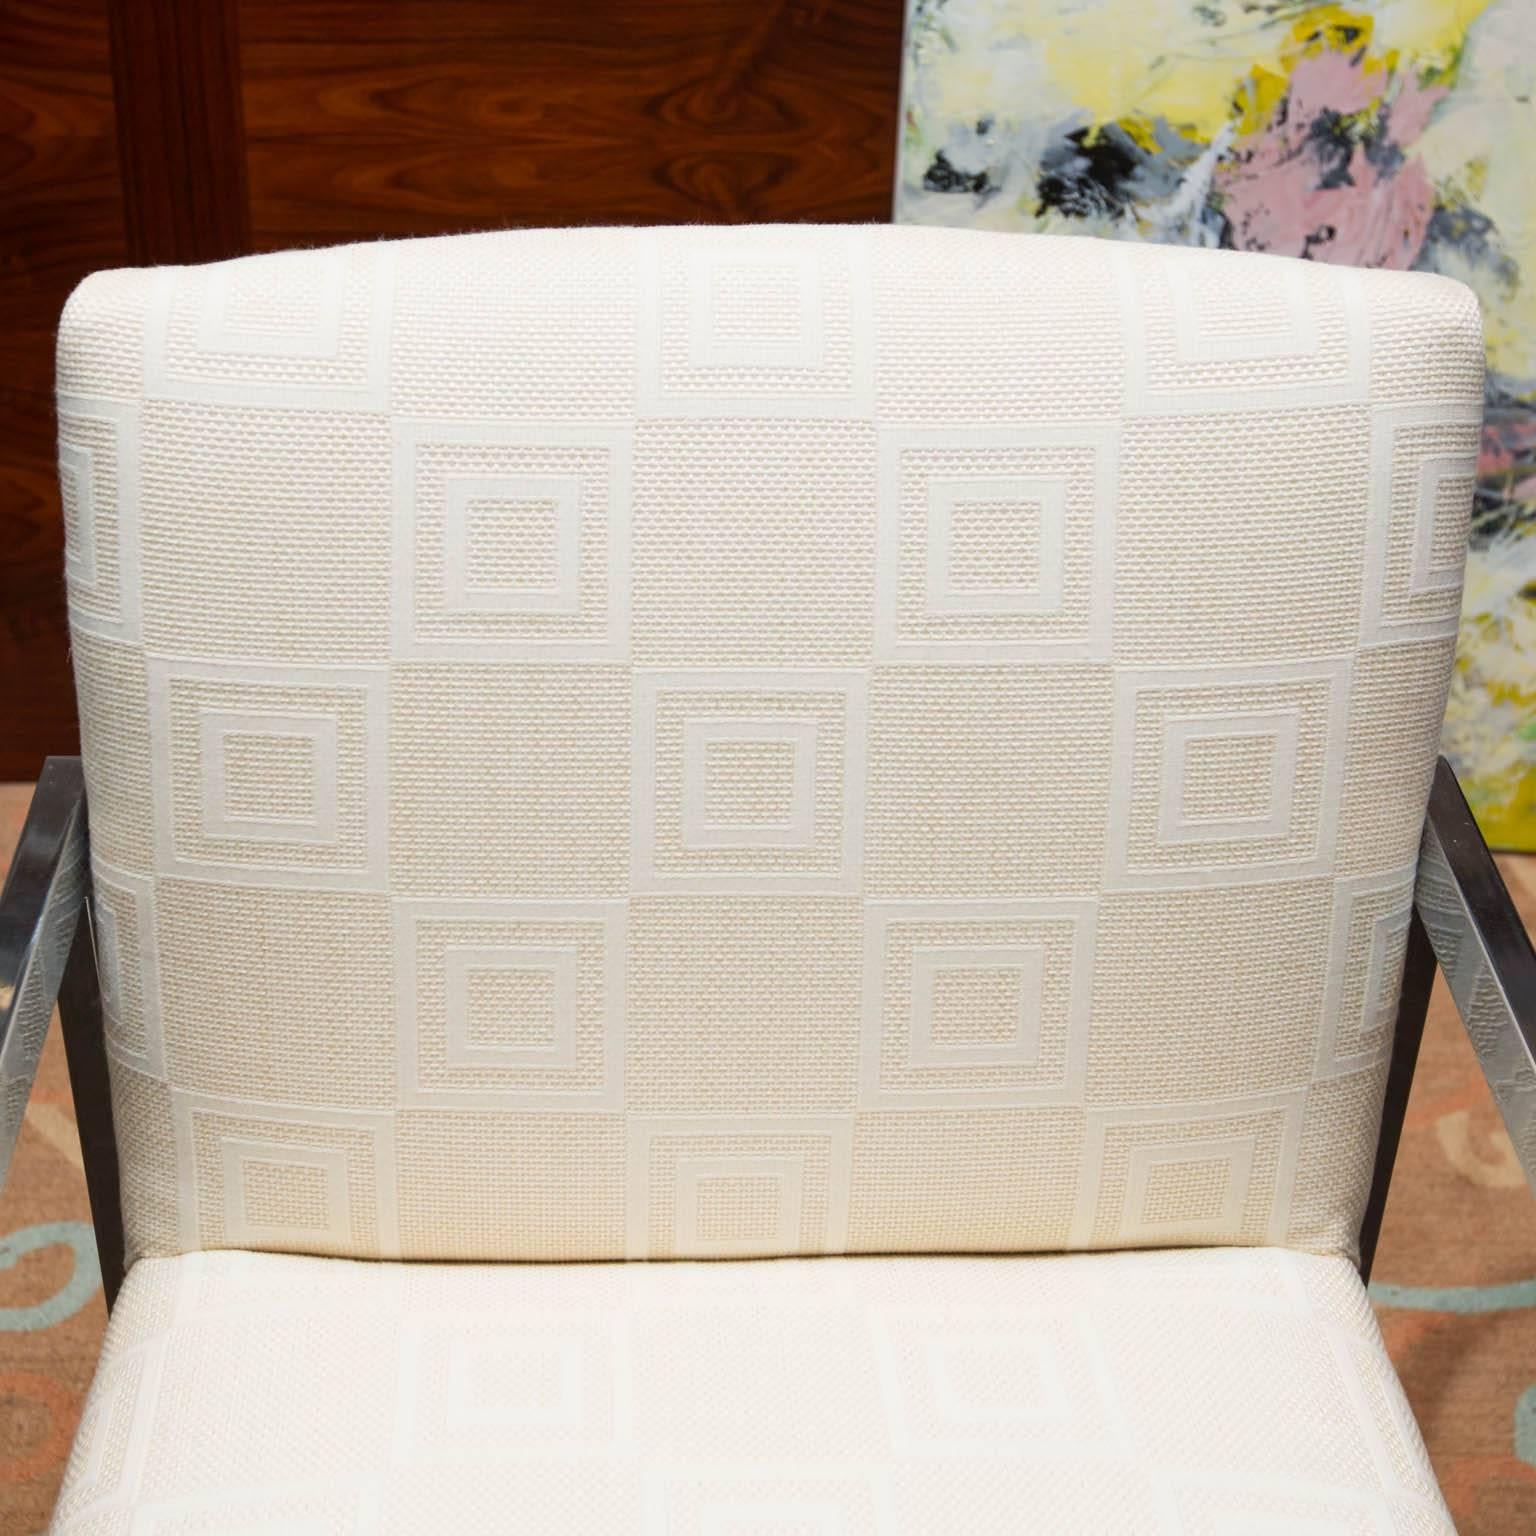 Vintage solo piece in the manner of Milo Baughman's designs for Thonet. Reupholstered in a checkered graphic white on white fabric, with gleaming chrome arms and frame.